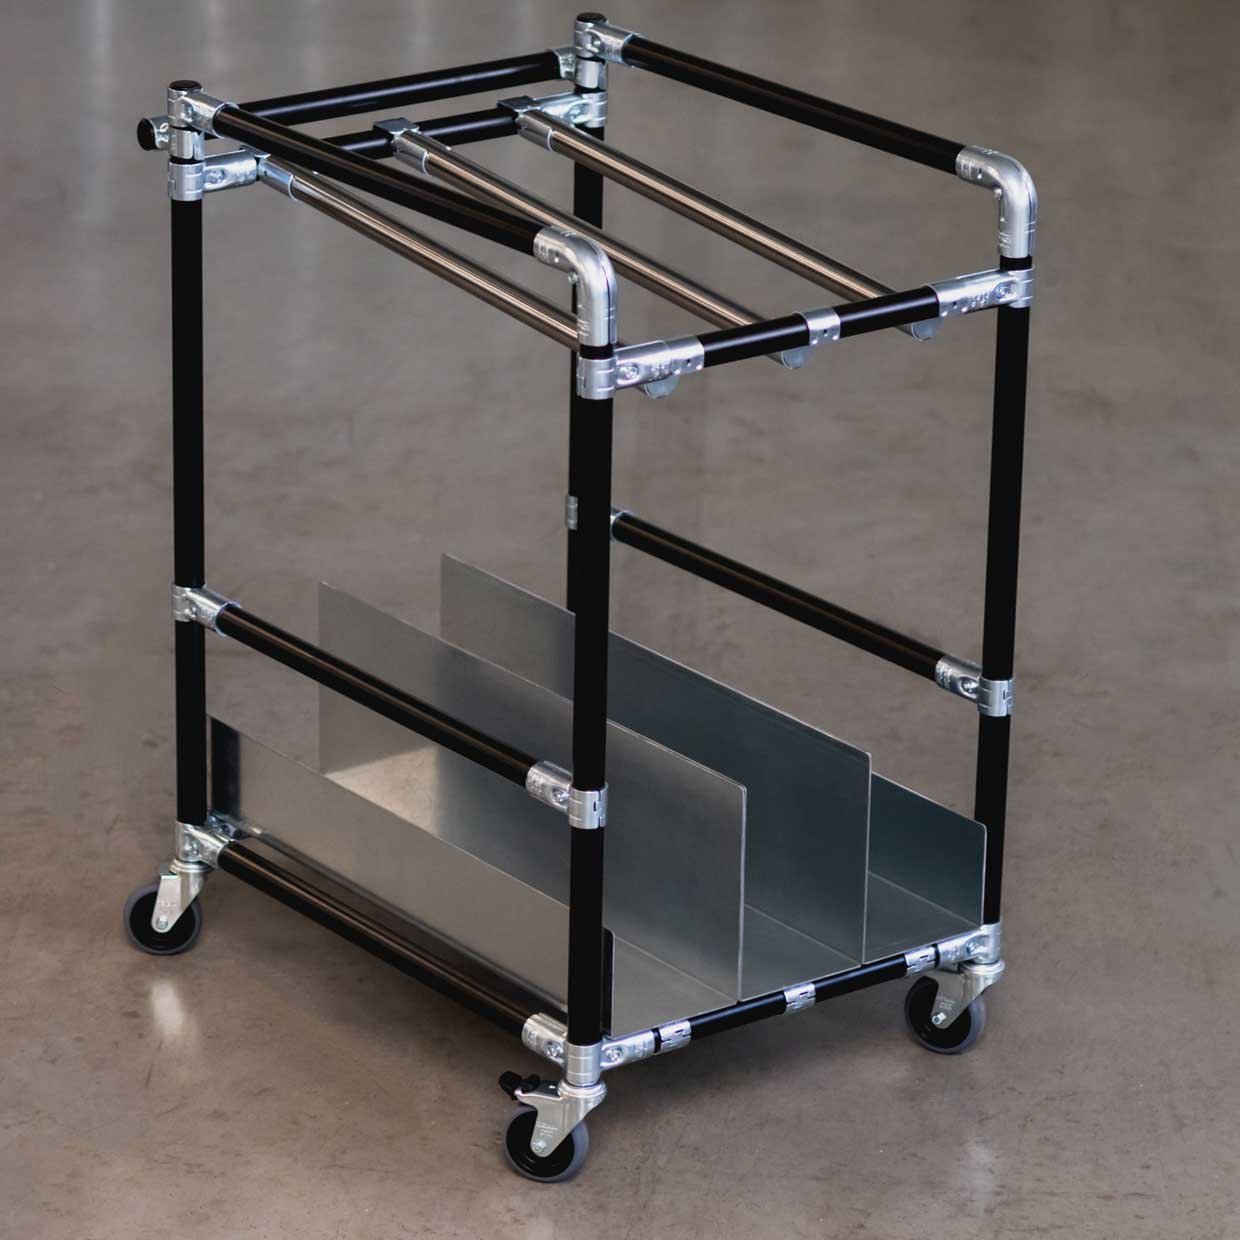 Mobile staging trolley made of pipe racking system